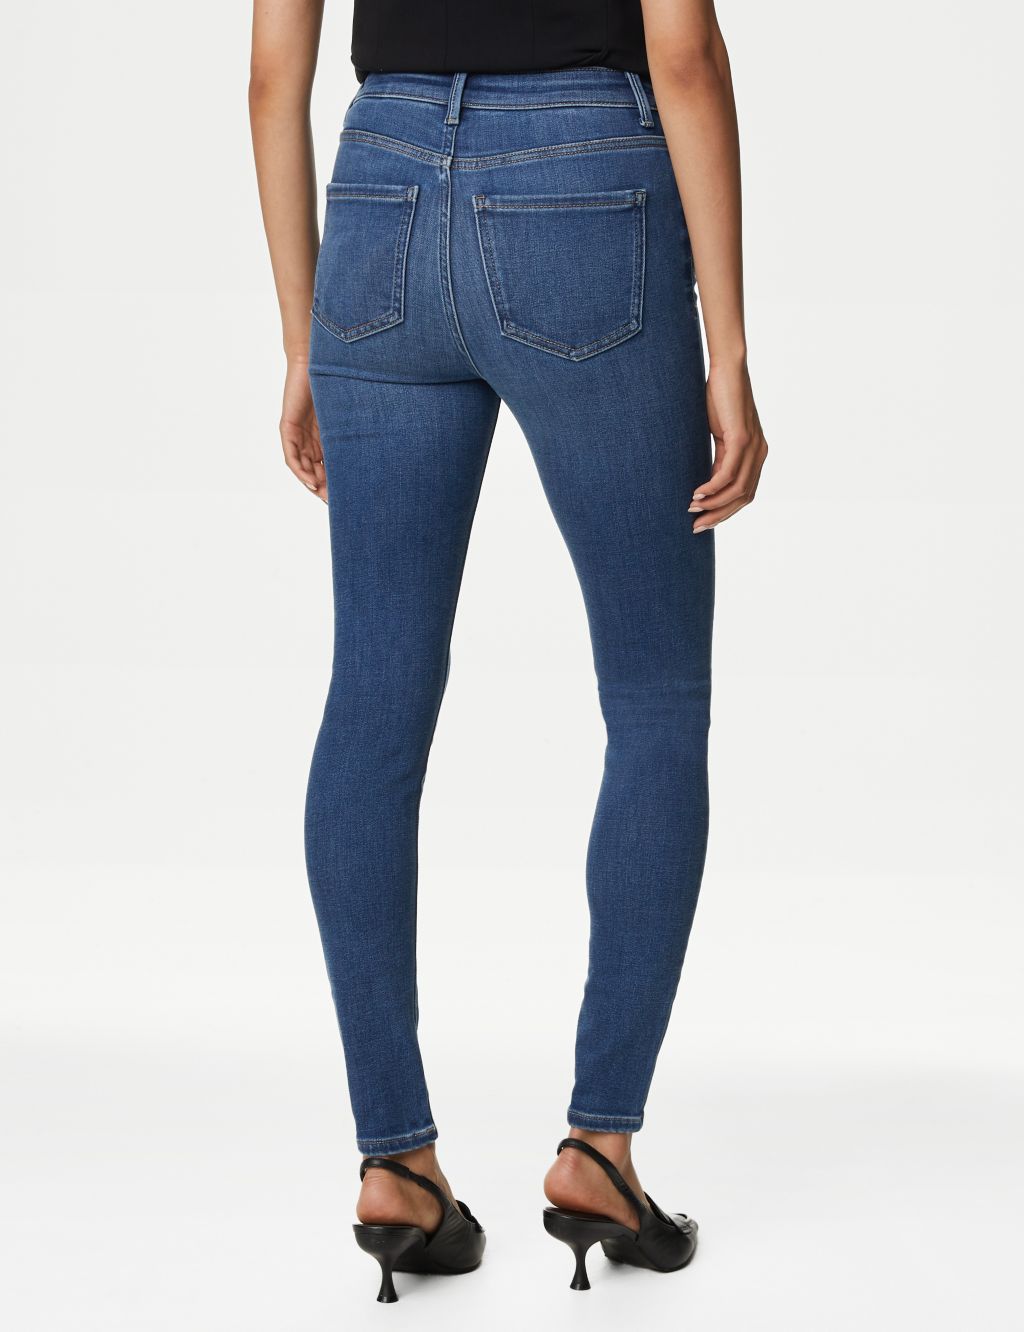 Ivy Thermal High Waisted Skinny Jeans image 5